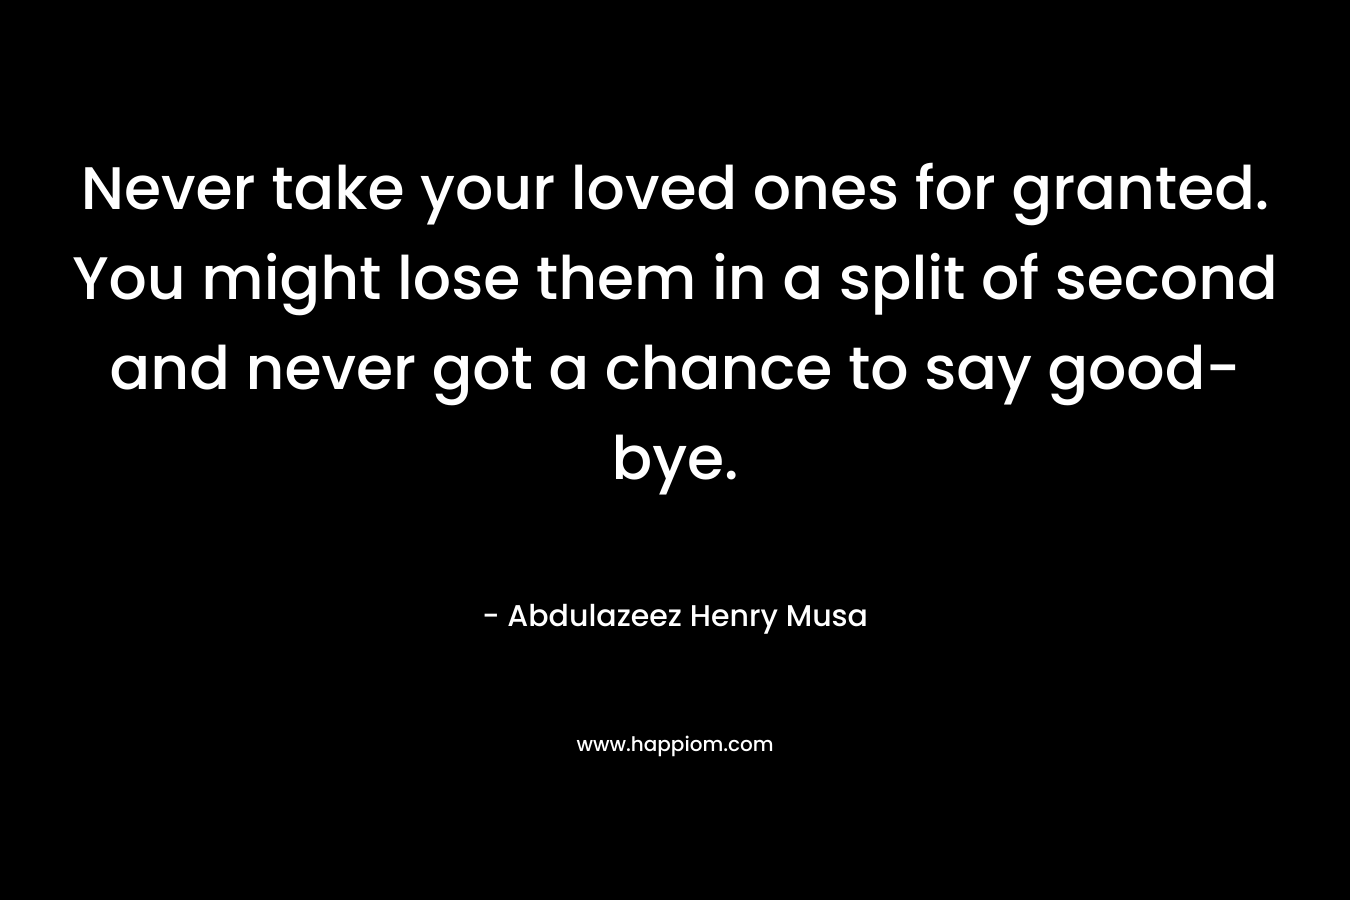 Never take your loved ones for granted. You might lose them in a split of second and never got a chance to say good-bye.